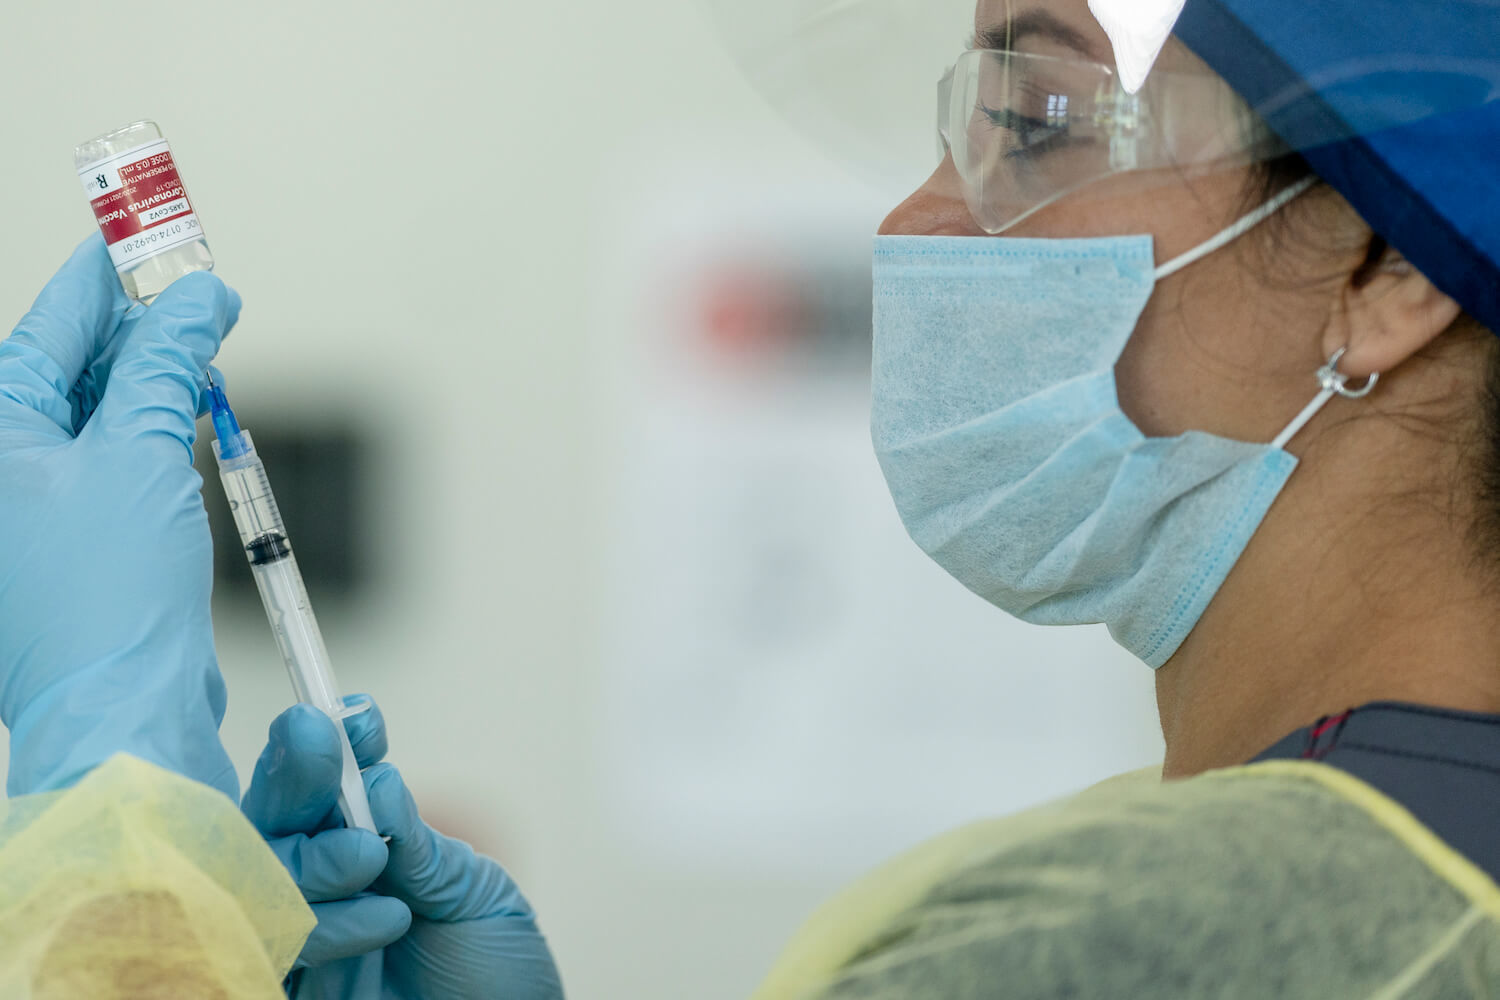 Nurse with a mask administers a Covid-19 vaccination. December 2020